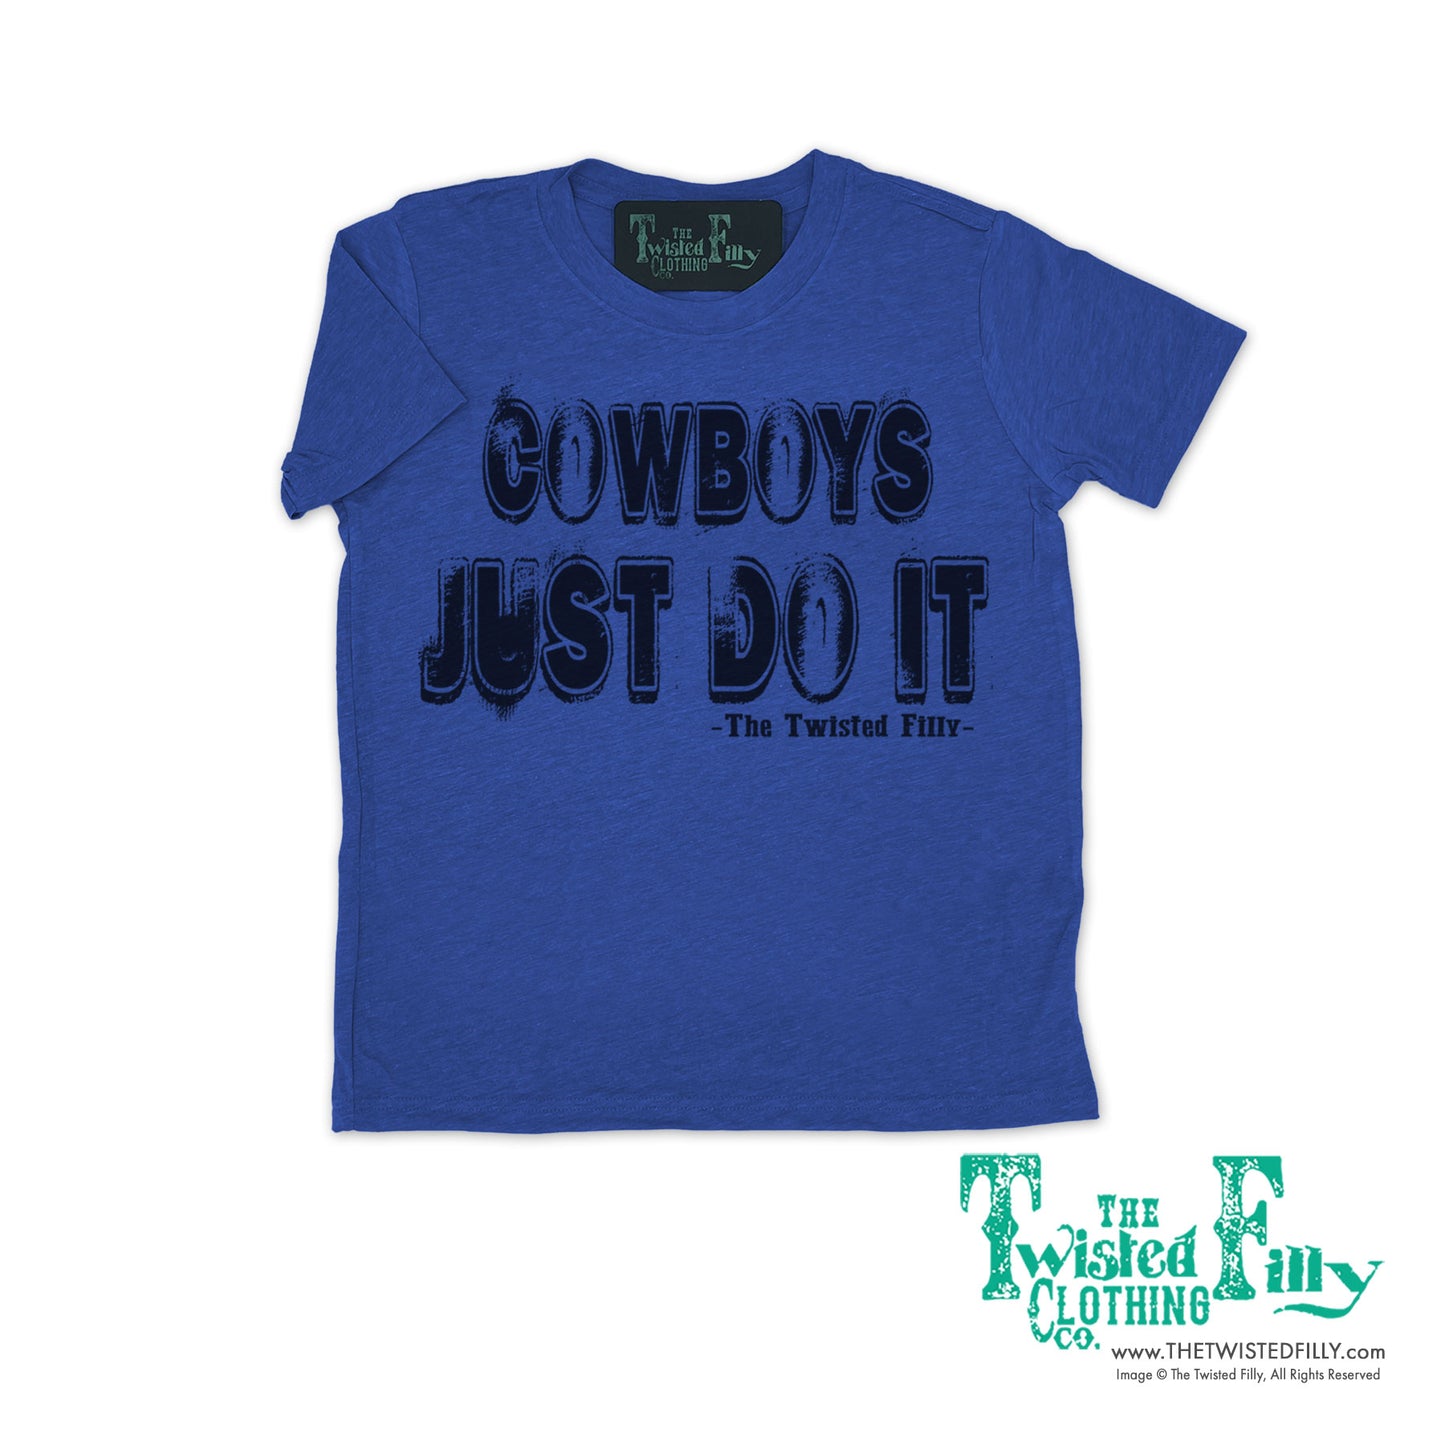 Cowboys Just Do It - S/S Infant Boys Tee - Assorted Colors